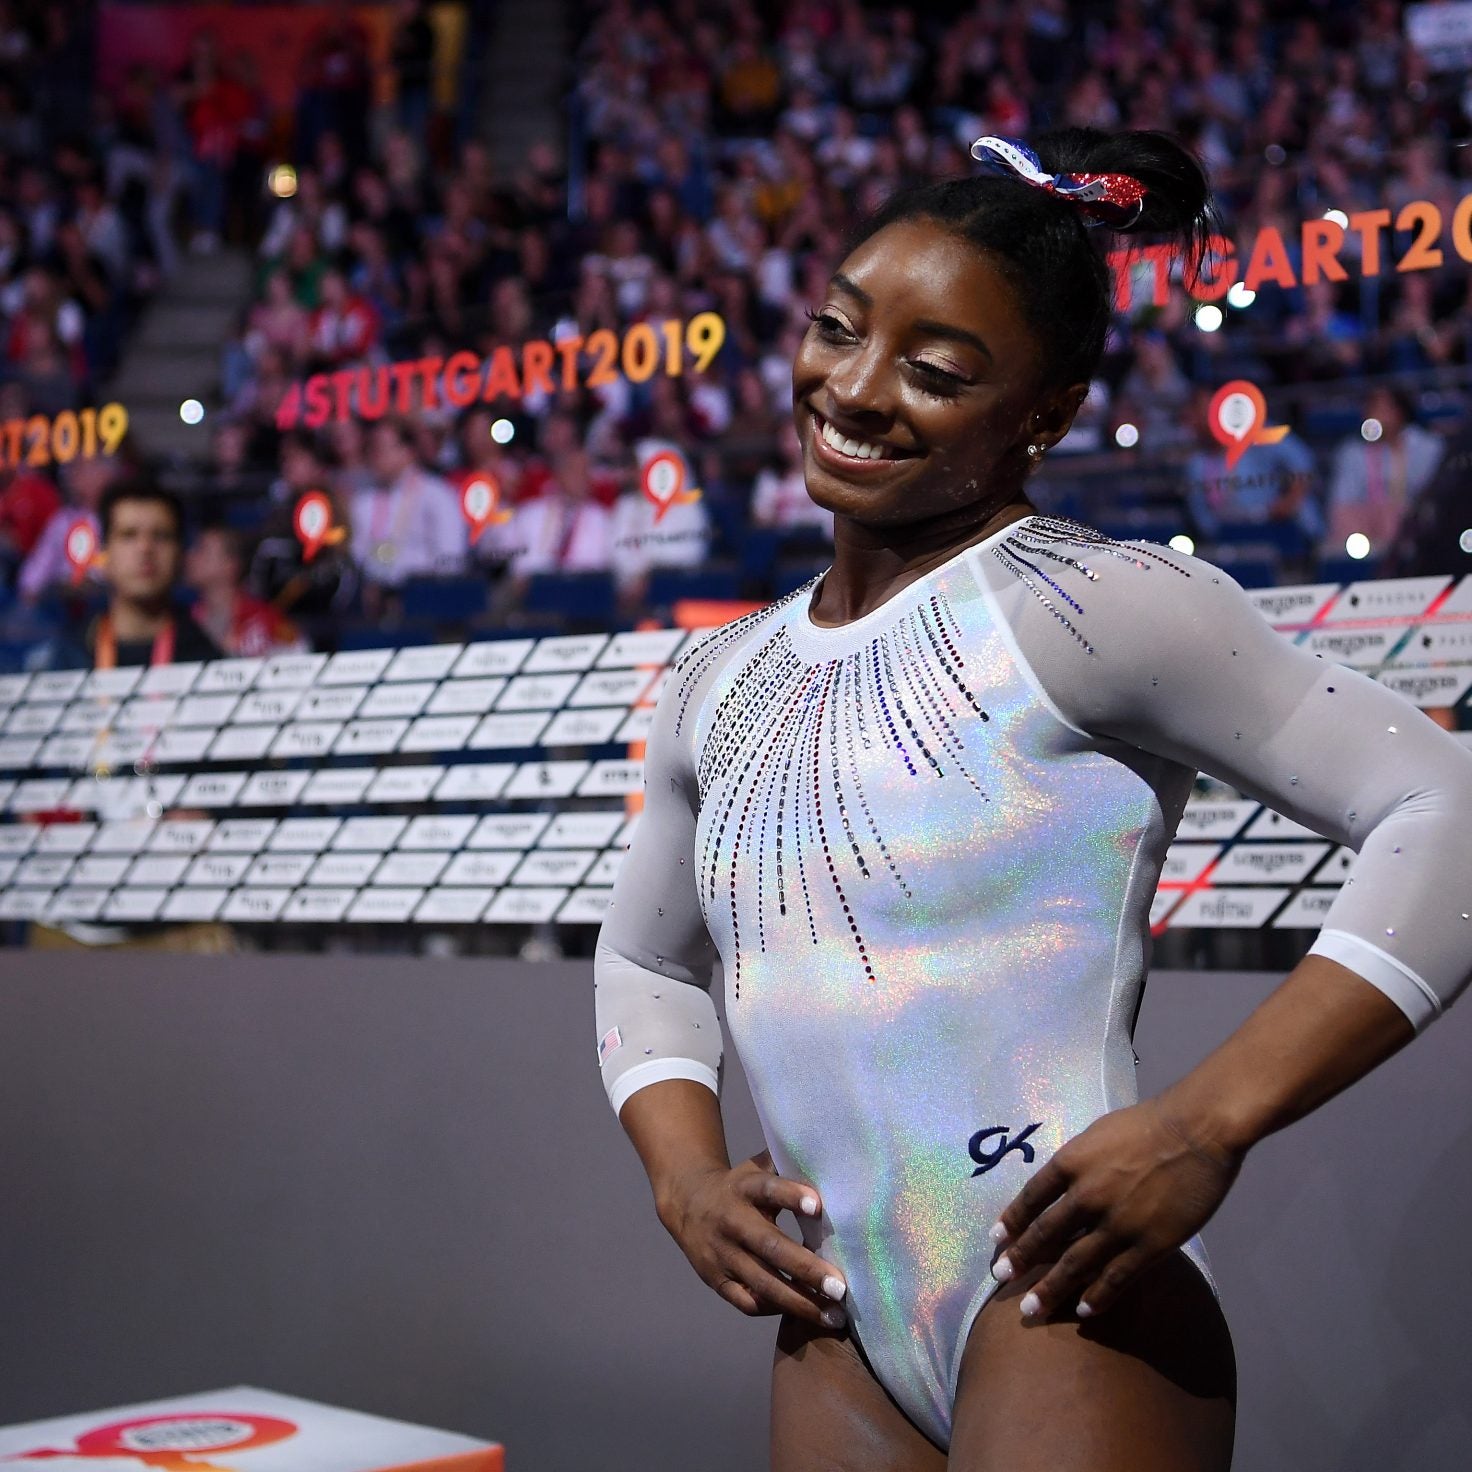 Simone Biles Says 'The Pain Is Real' After Report Shows U.S. Gymnastics Didn't Investigate Her Abuse By Larry Nassar